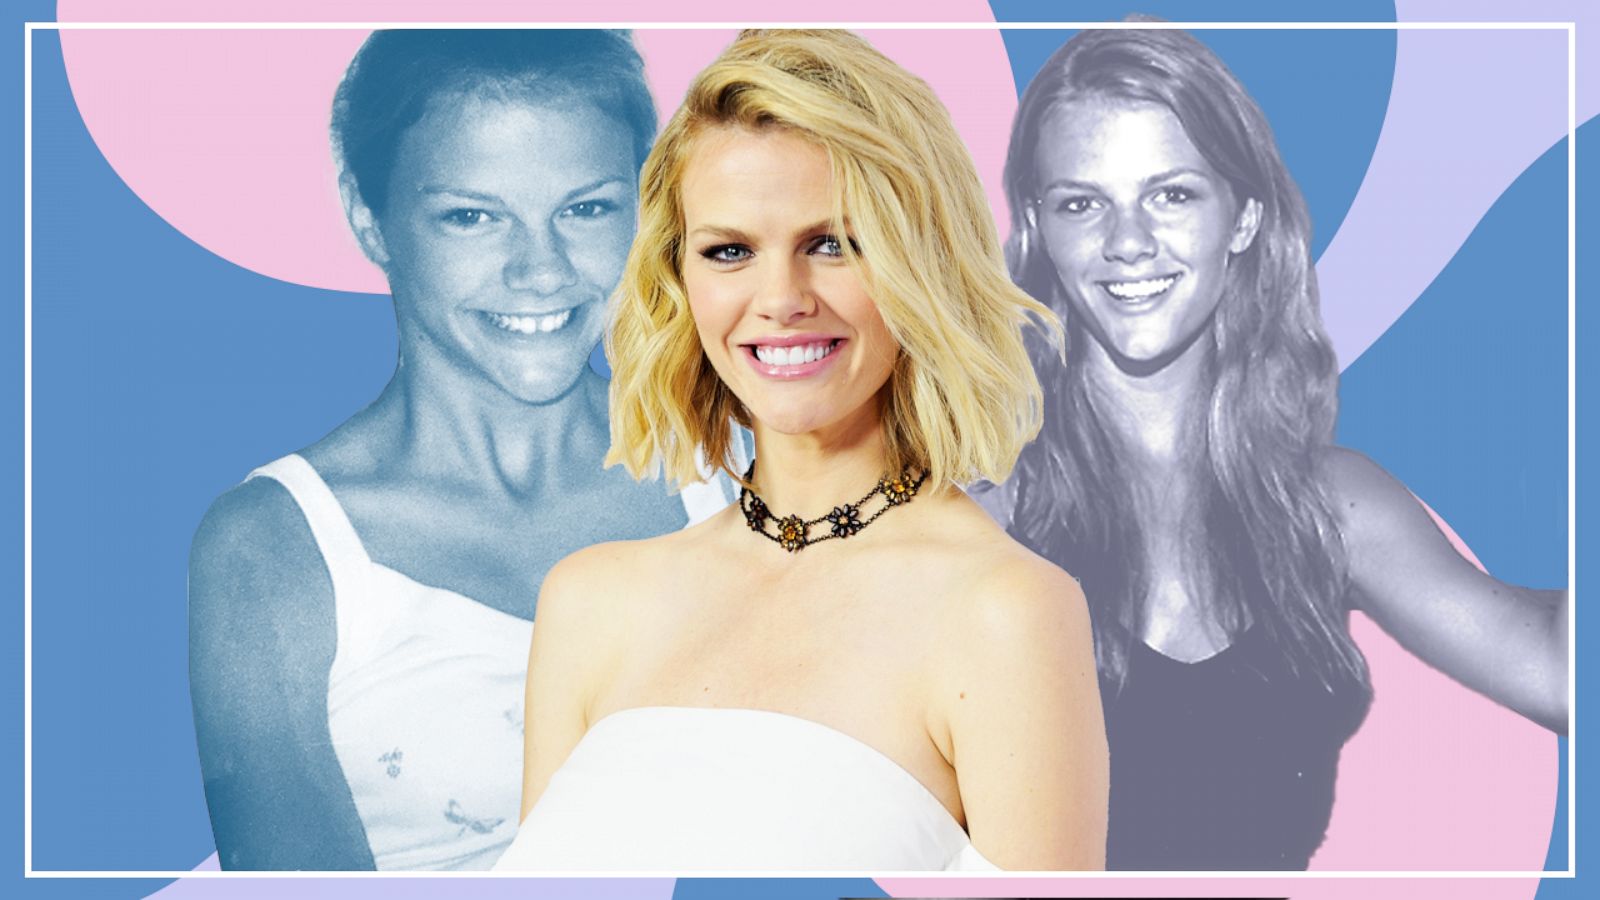 Brooklyn Decker and other hot models who act – Orange County Register